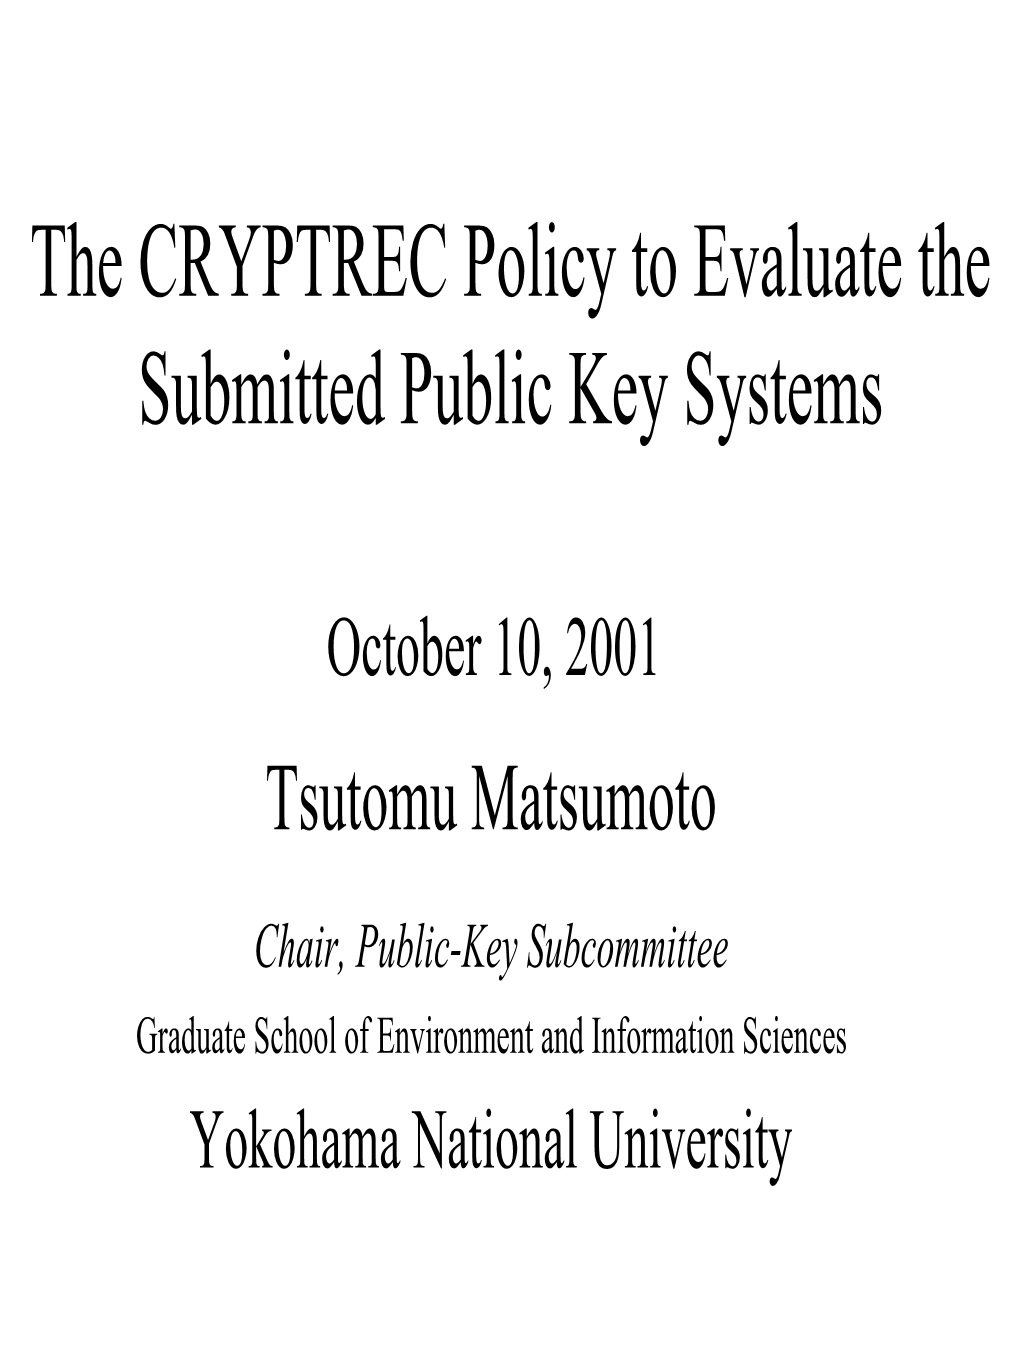 The CRYPTREC Policy to Evaluate the Submitted Public Key Systems